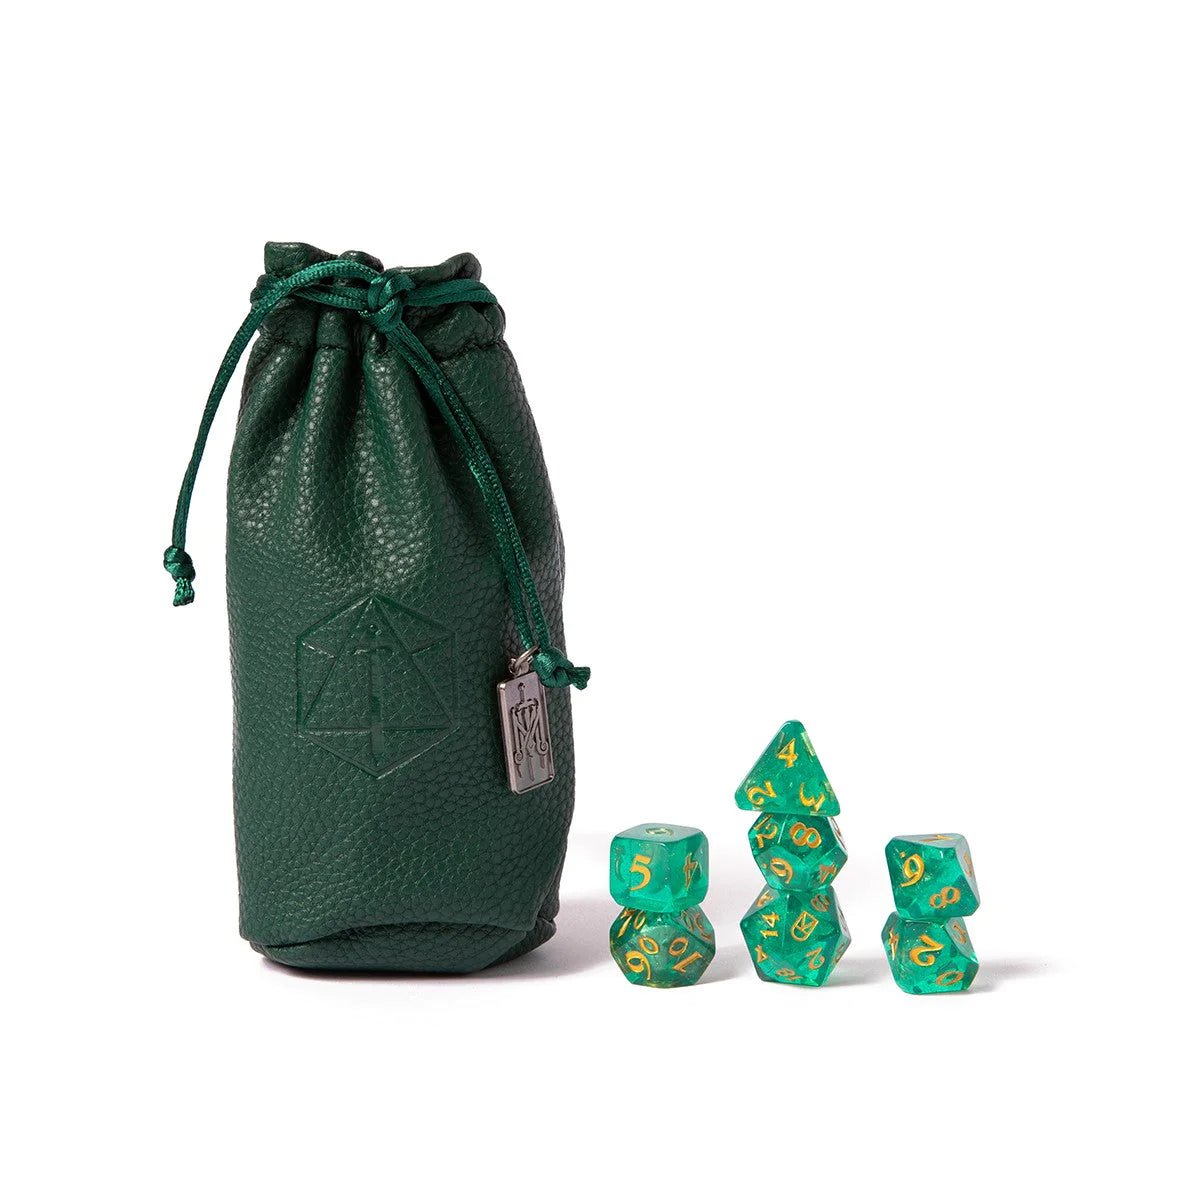 Mighty Nein Dice Set: The Traveller (Green/Gold) - The Fourth Place